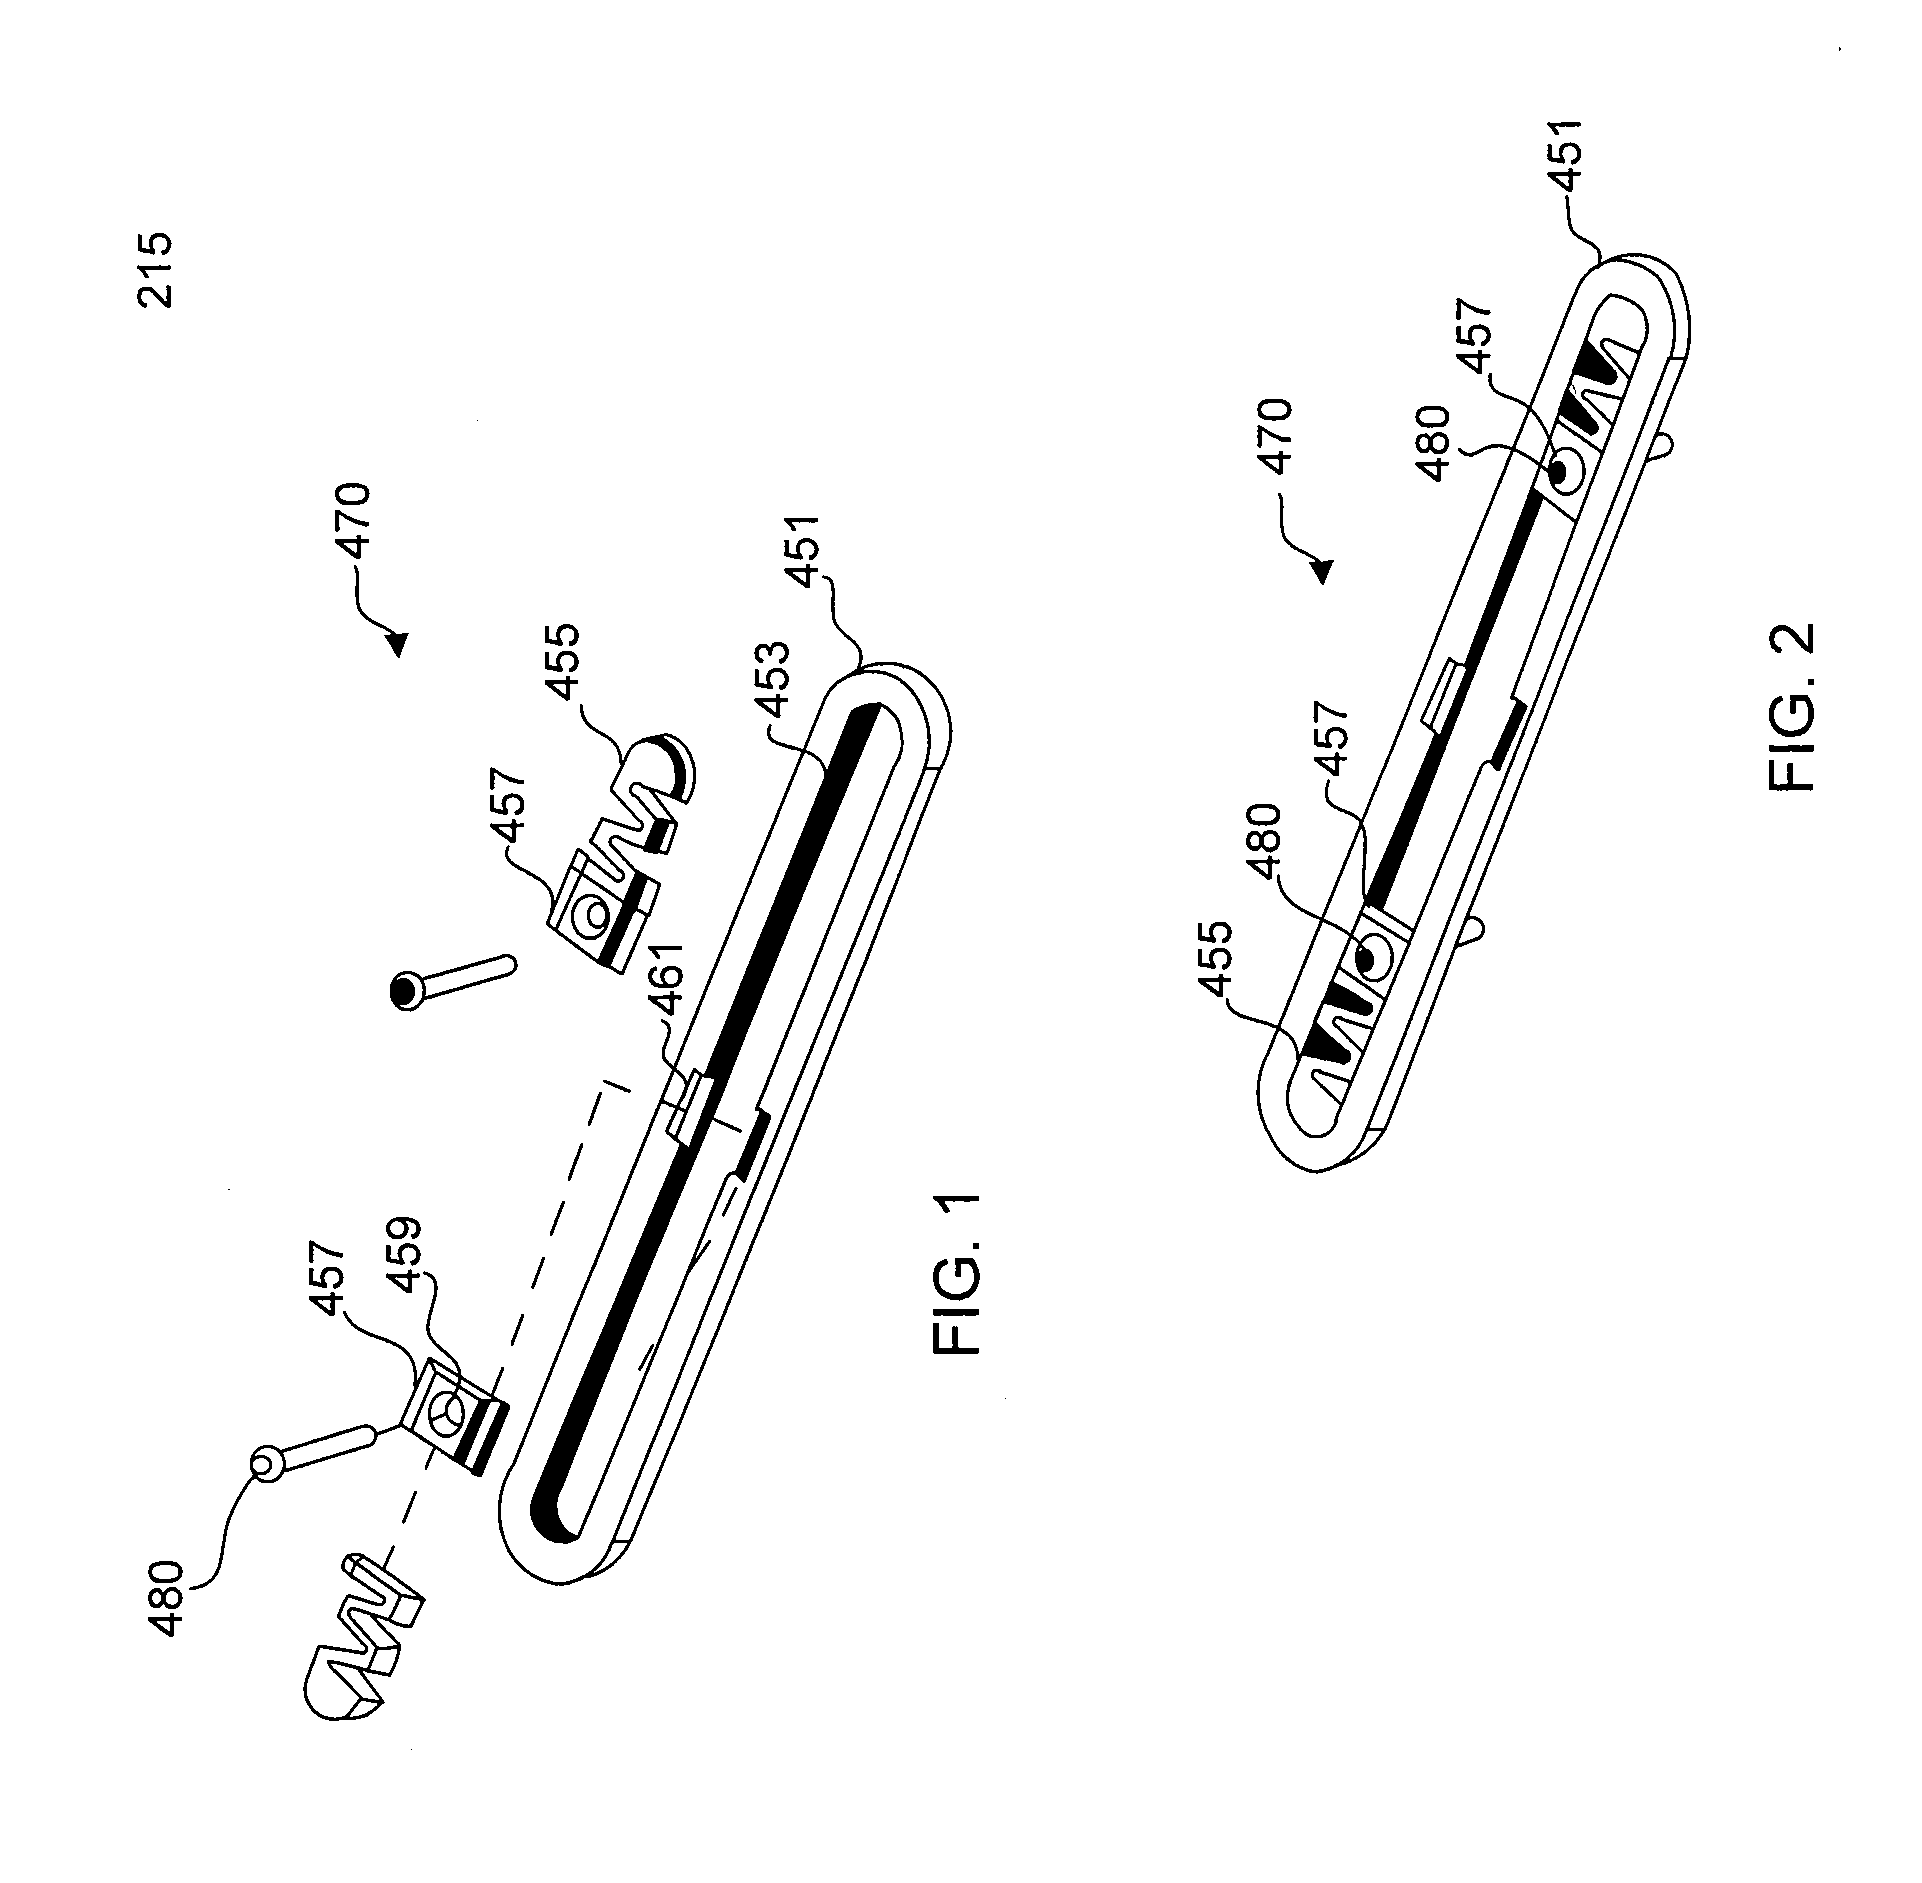 Bone screw system and method for the fixation of bone fractures